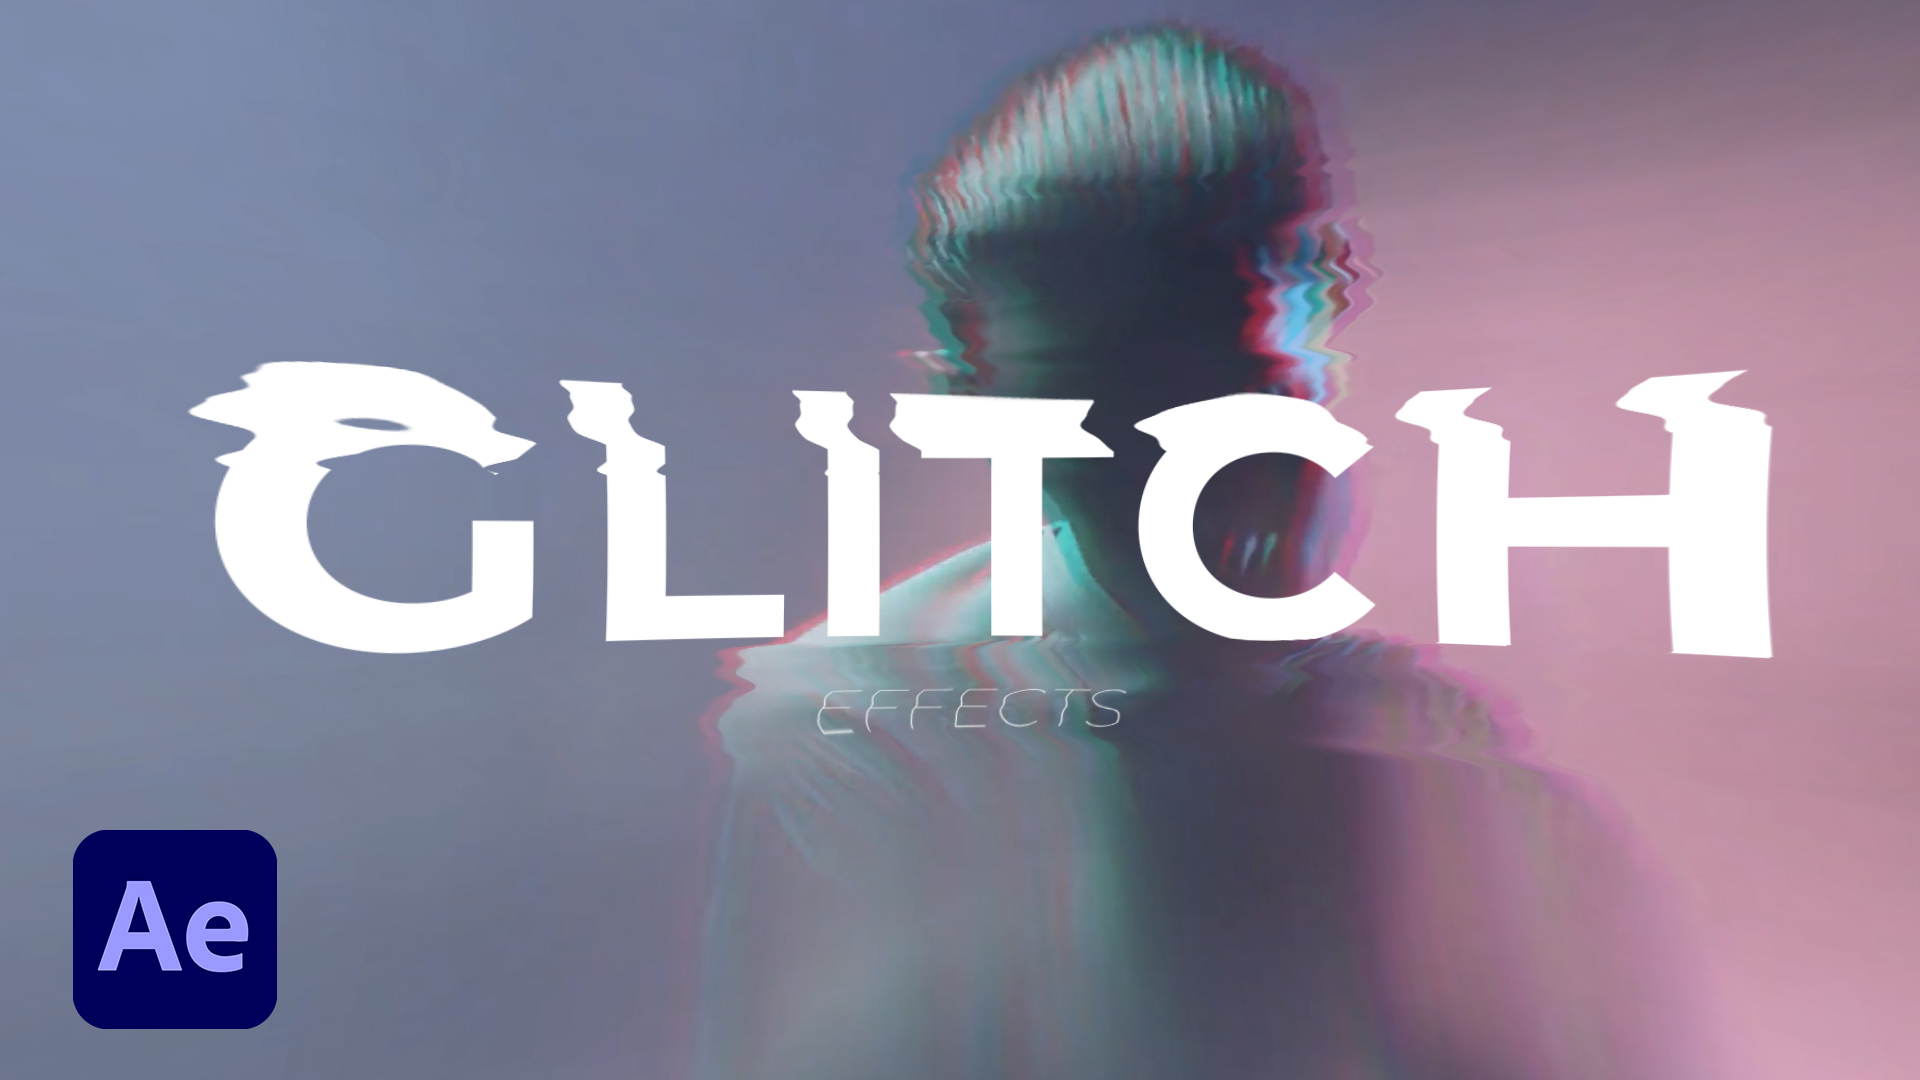 Glitch effect after effects. Глитч эффект в Афтер эффект. Глитч эффект в after Effects. Glitch эффект в after Effects. Glitch 3.